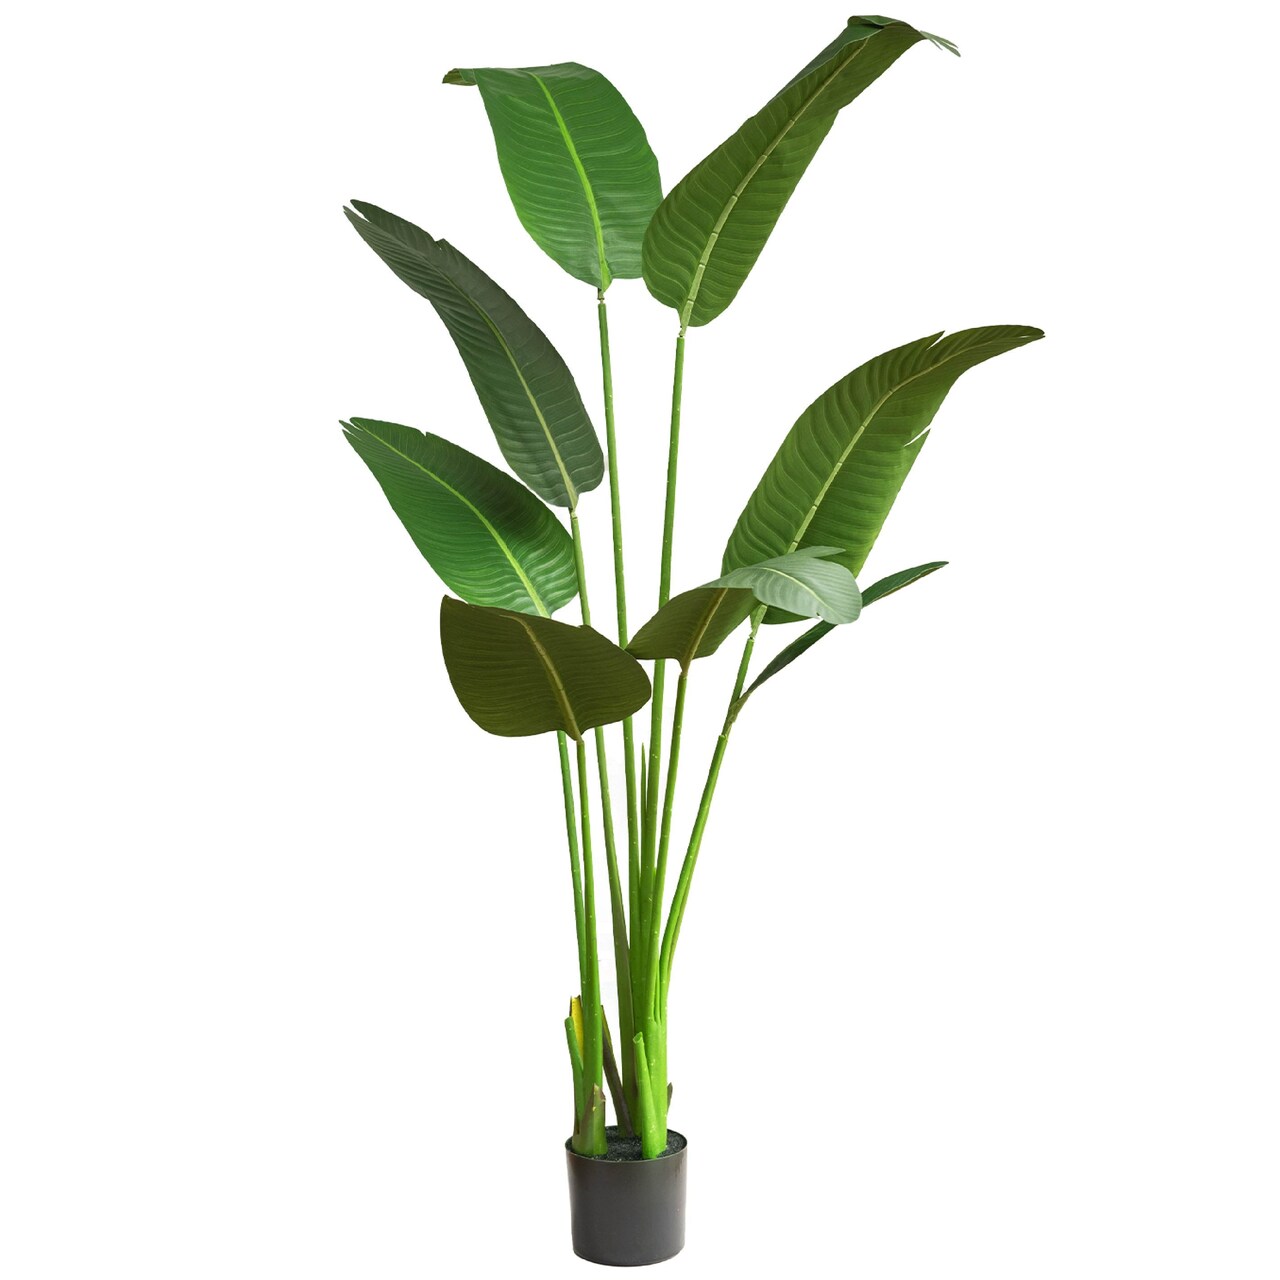 Bird of Paradise Artificial Plant - Fake Plants Tall, Tall Plants for Living Room Decor, Artificial Plants Indoor - Faux Plants Indoor Tall, Tall Fake Plants Indoor, Banana Tree, Banana Plant (5 FEET)